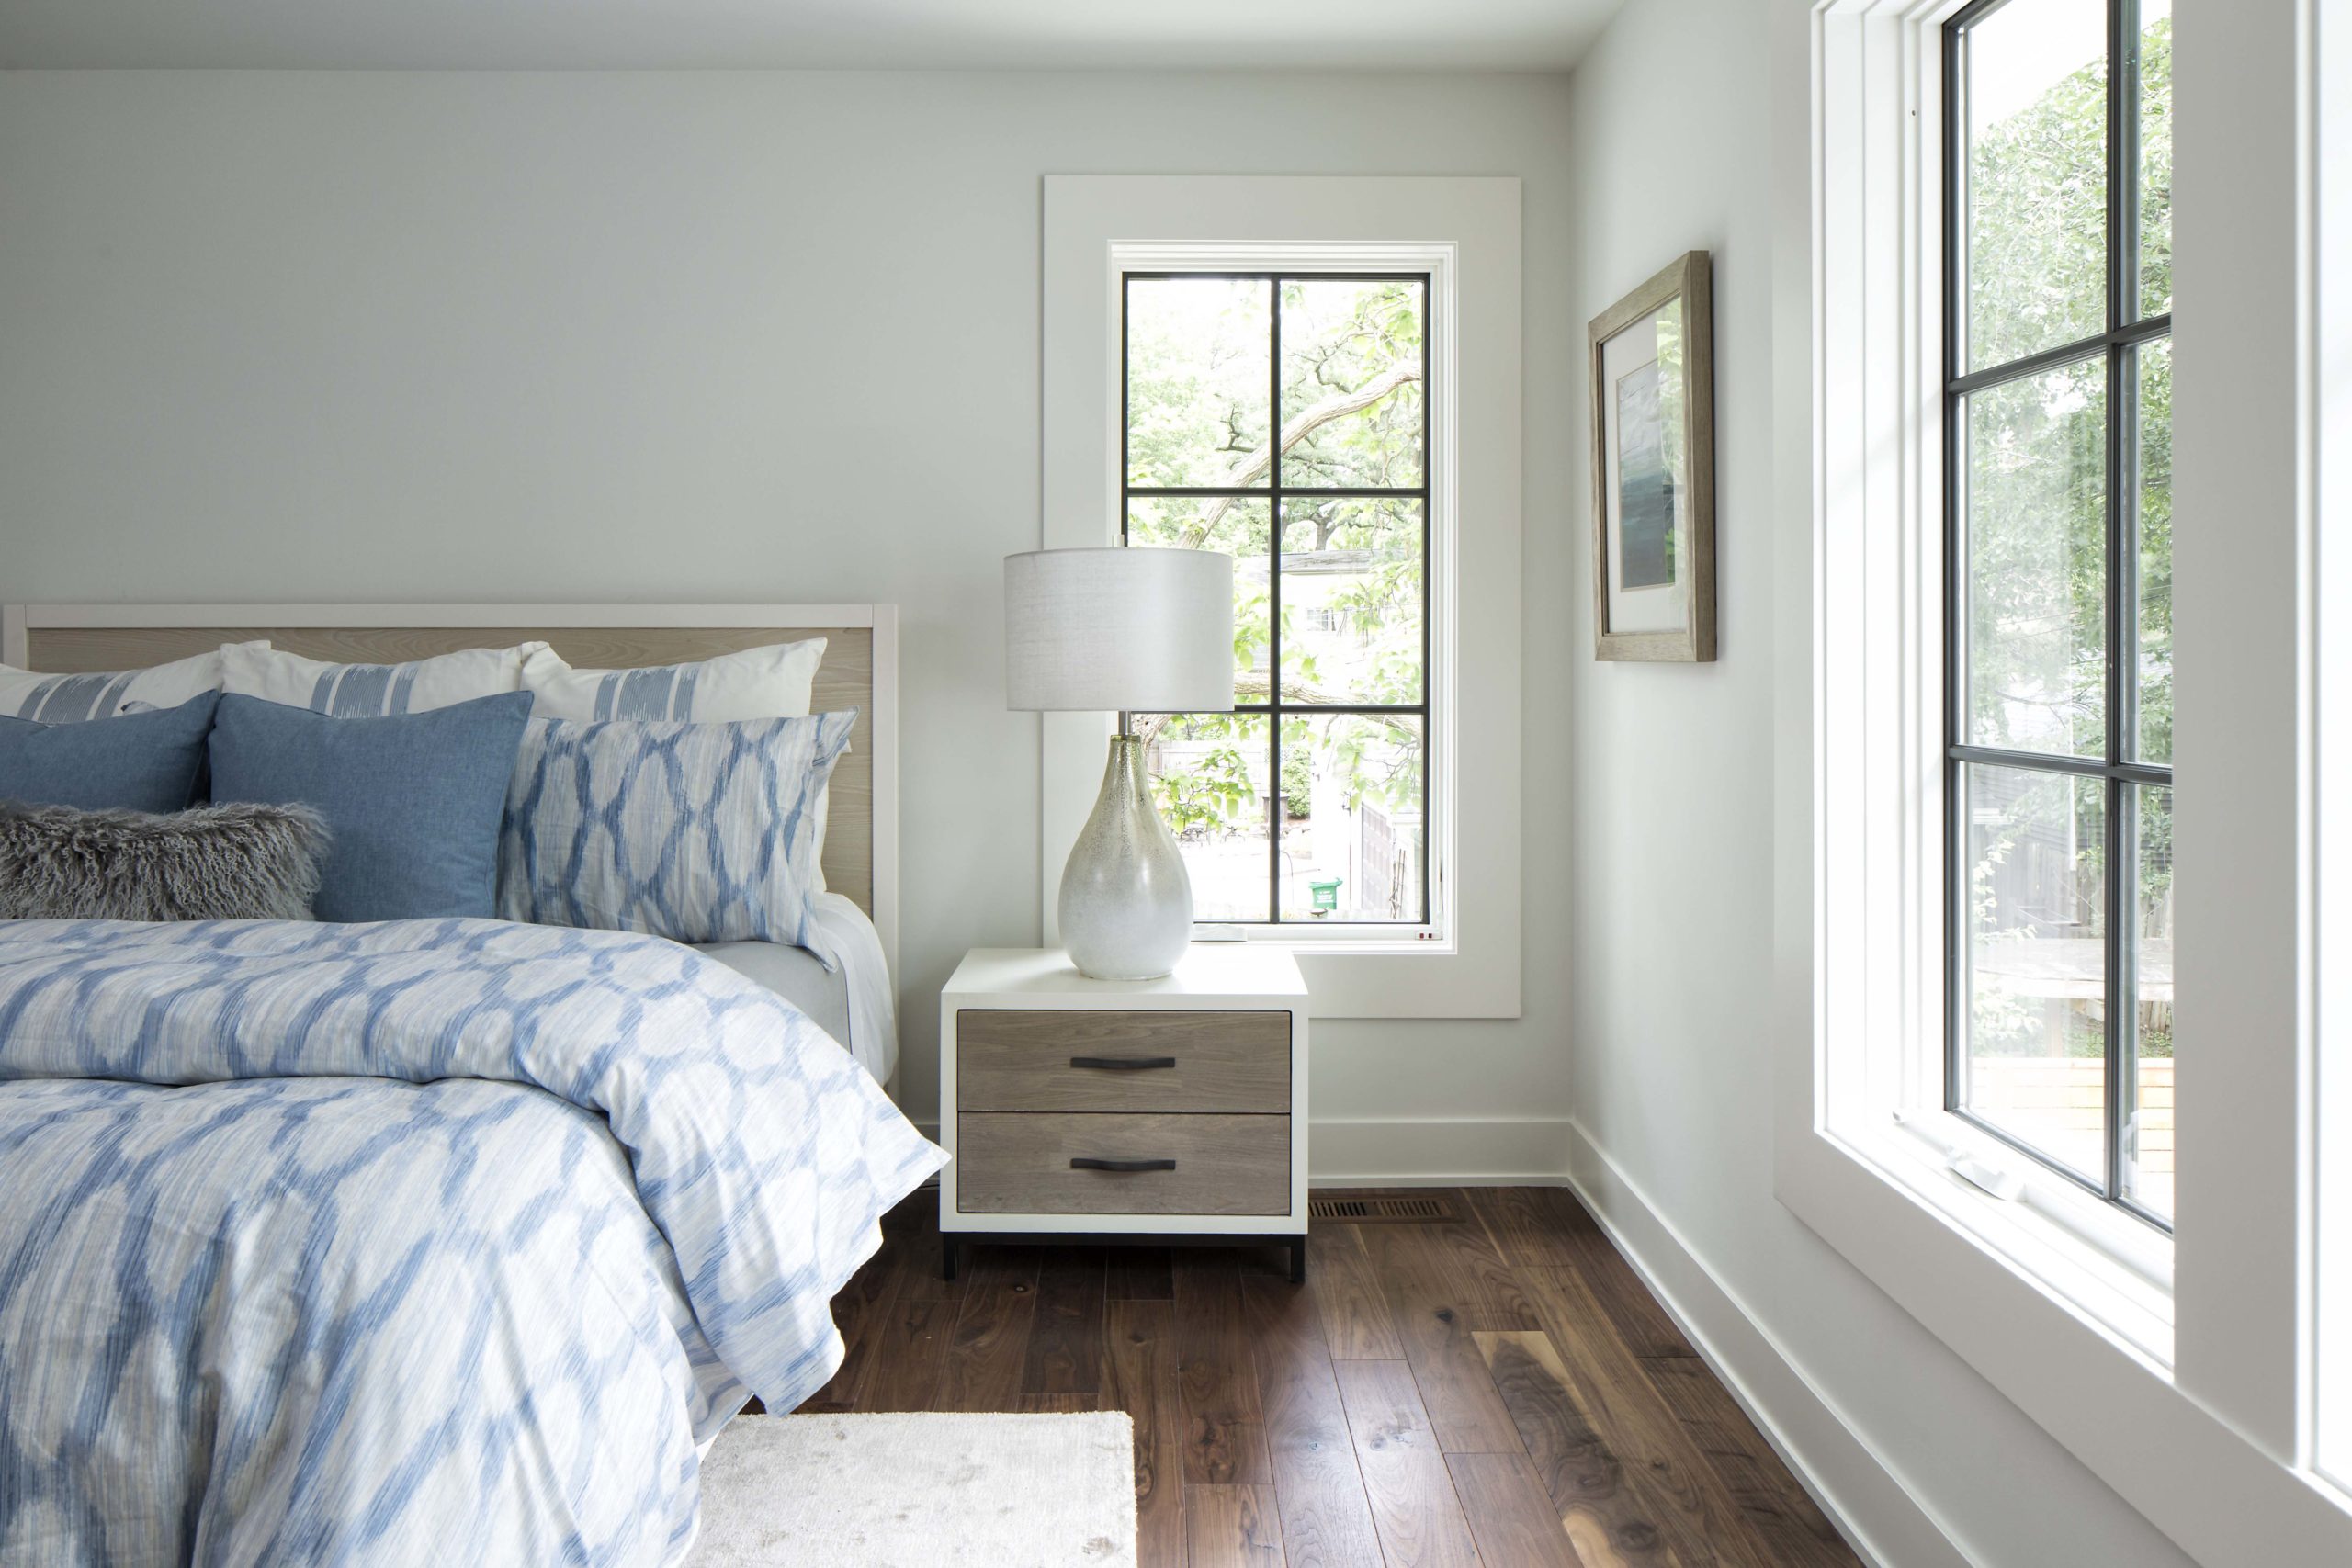 A blue and white bedroom with hardwood floors and a window.